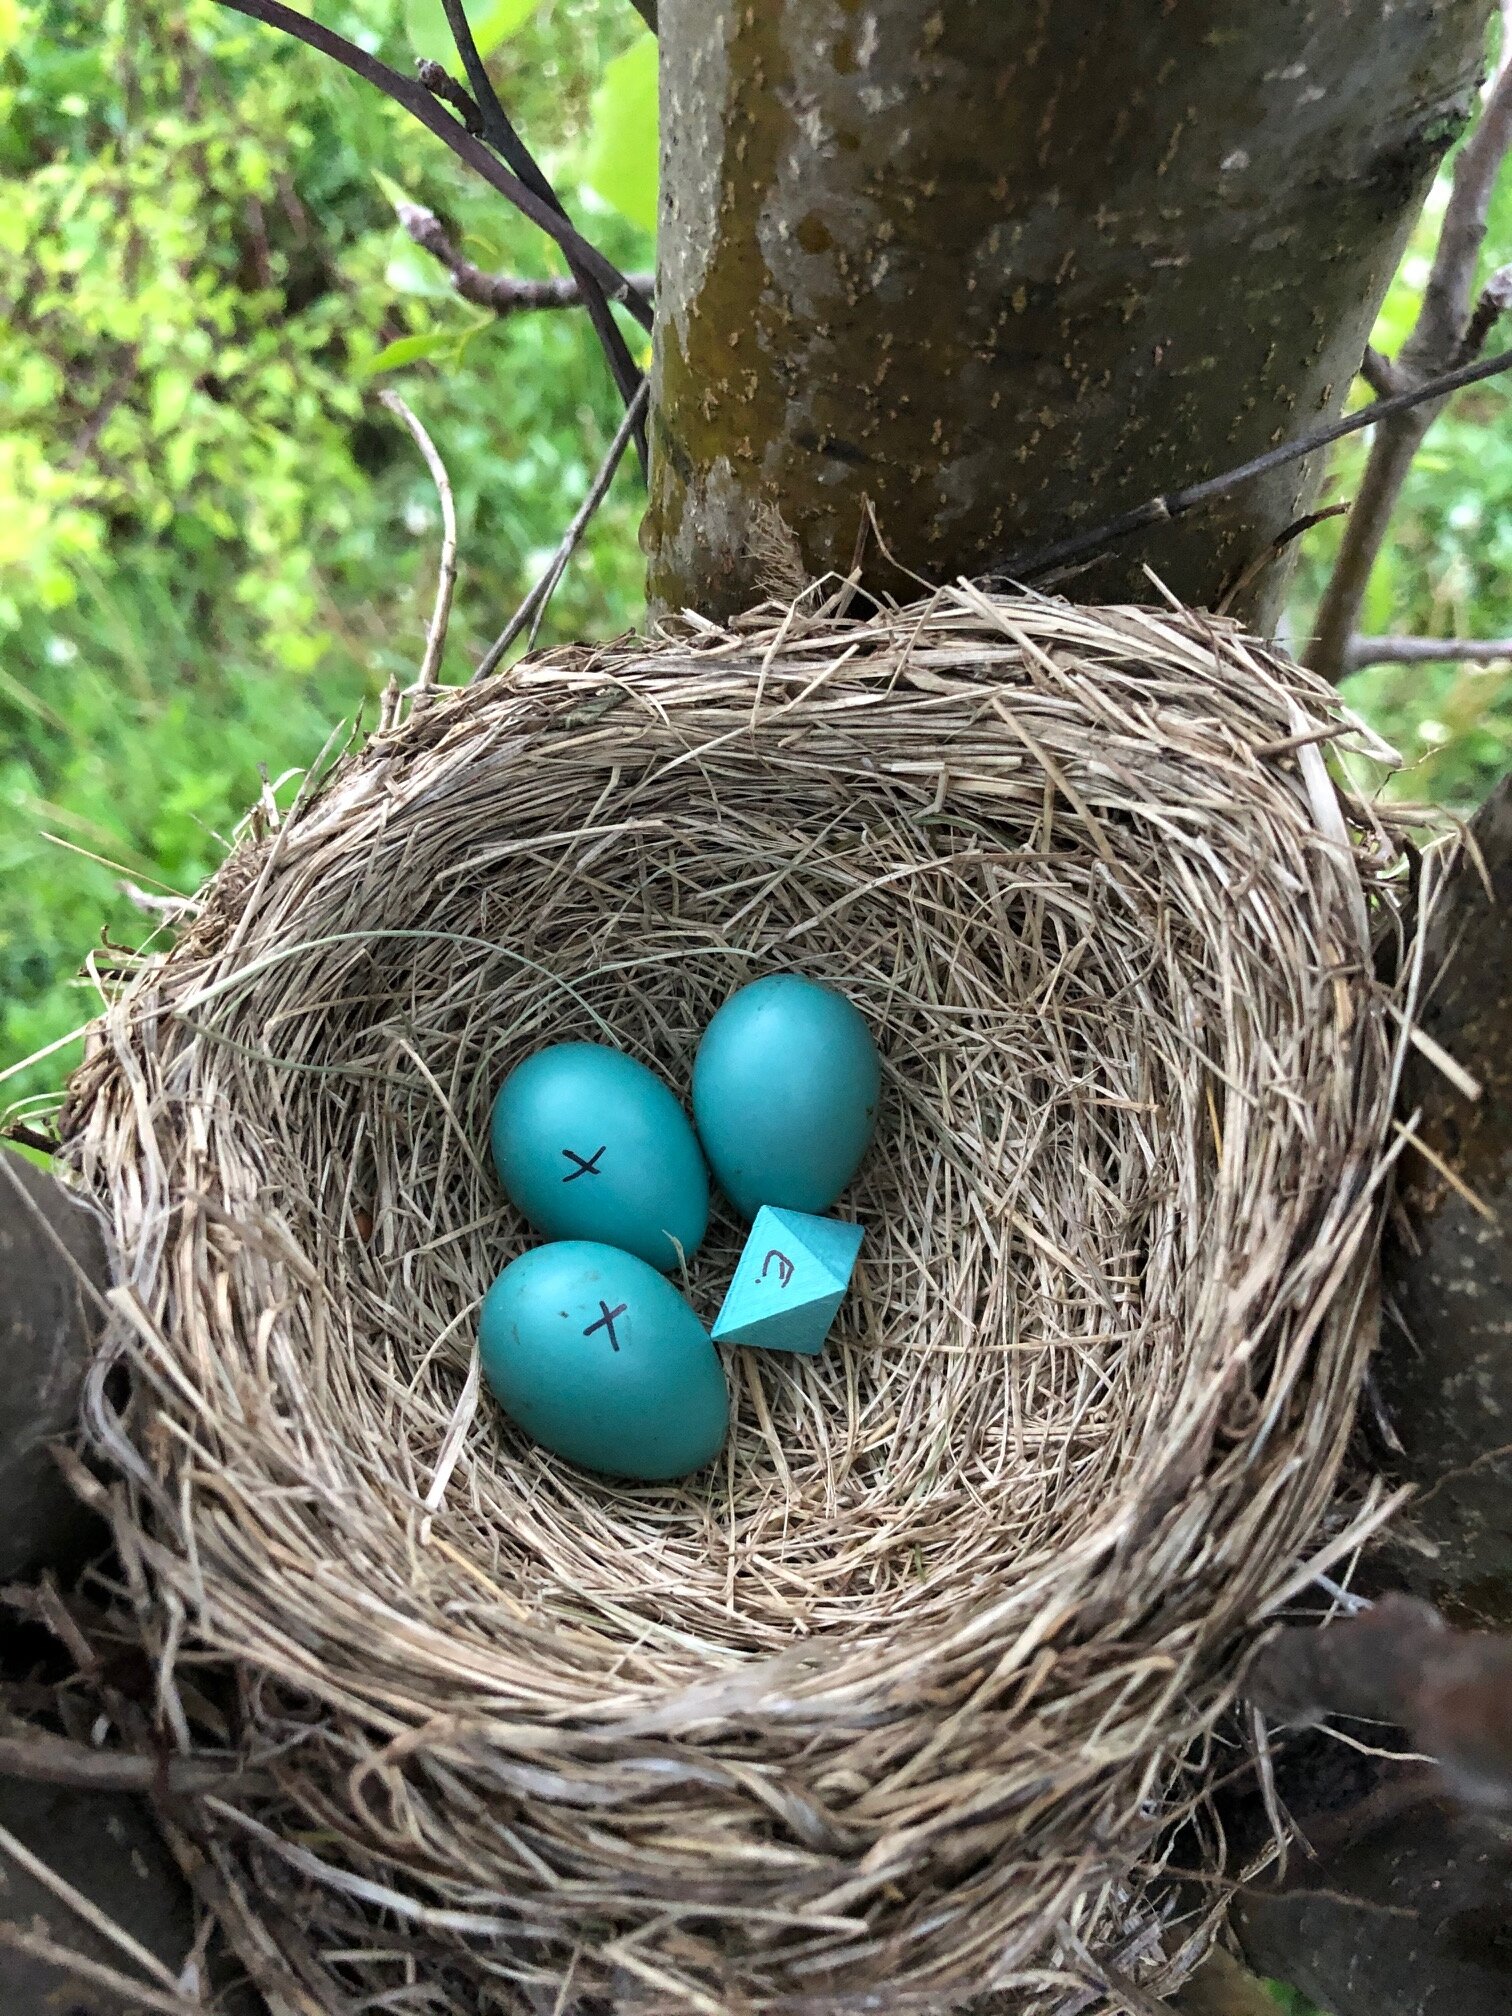 [:es]How an Eight-Sided ‘Egg’ Ended Up in a Robin’s Nest[:]